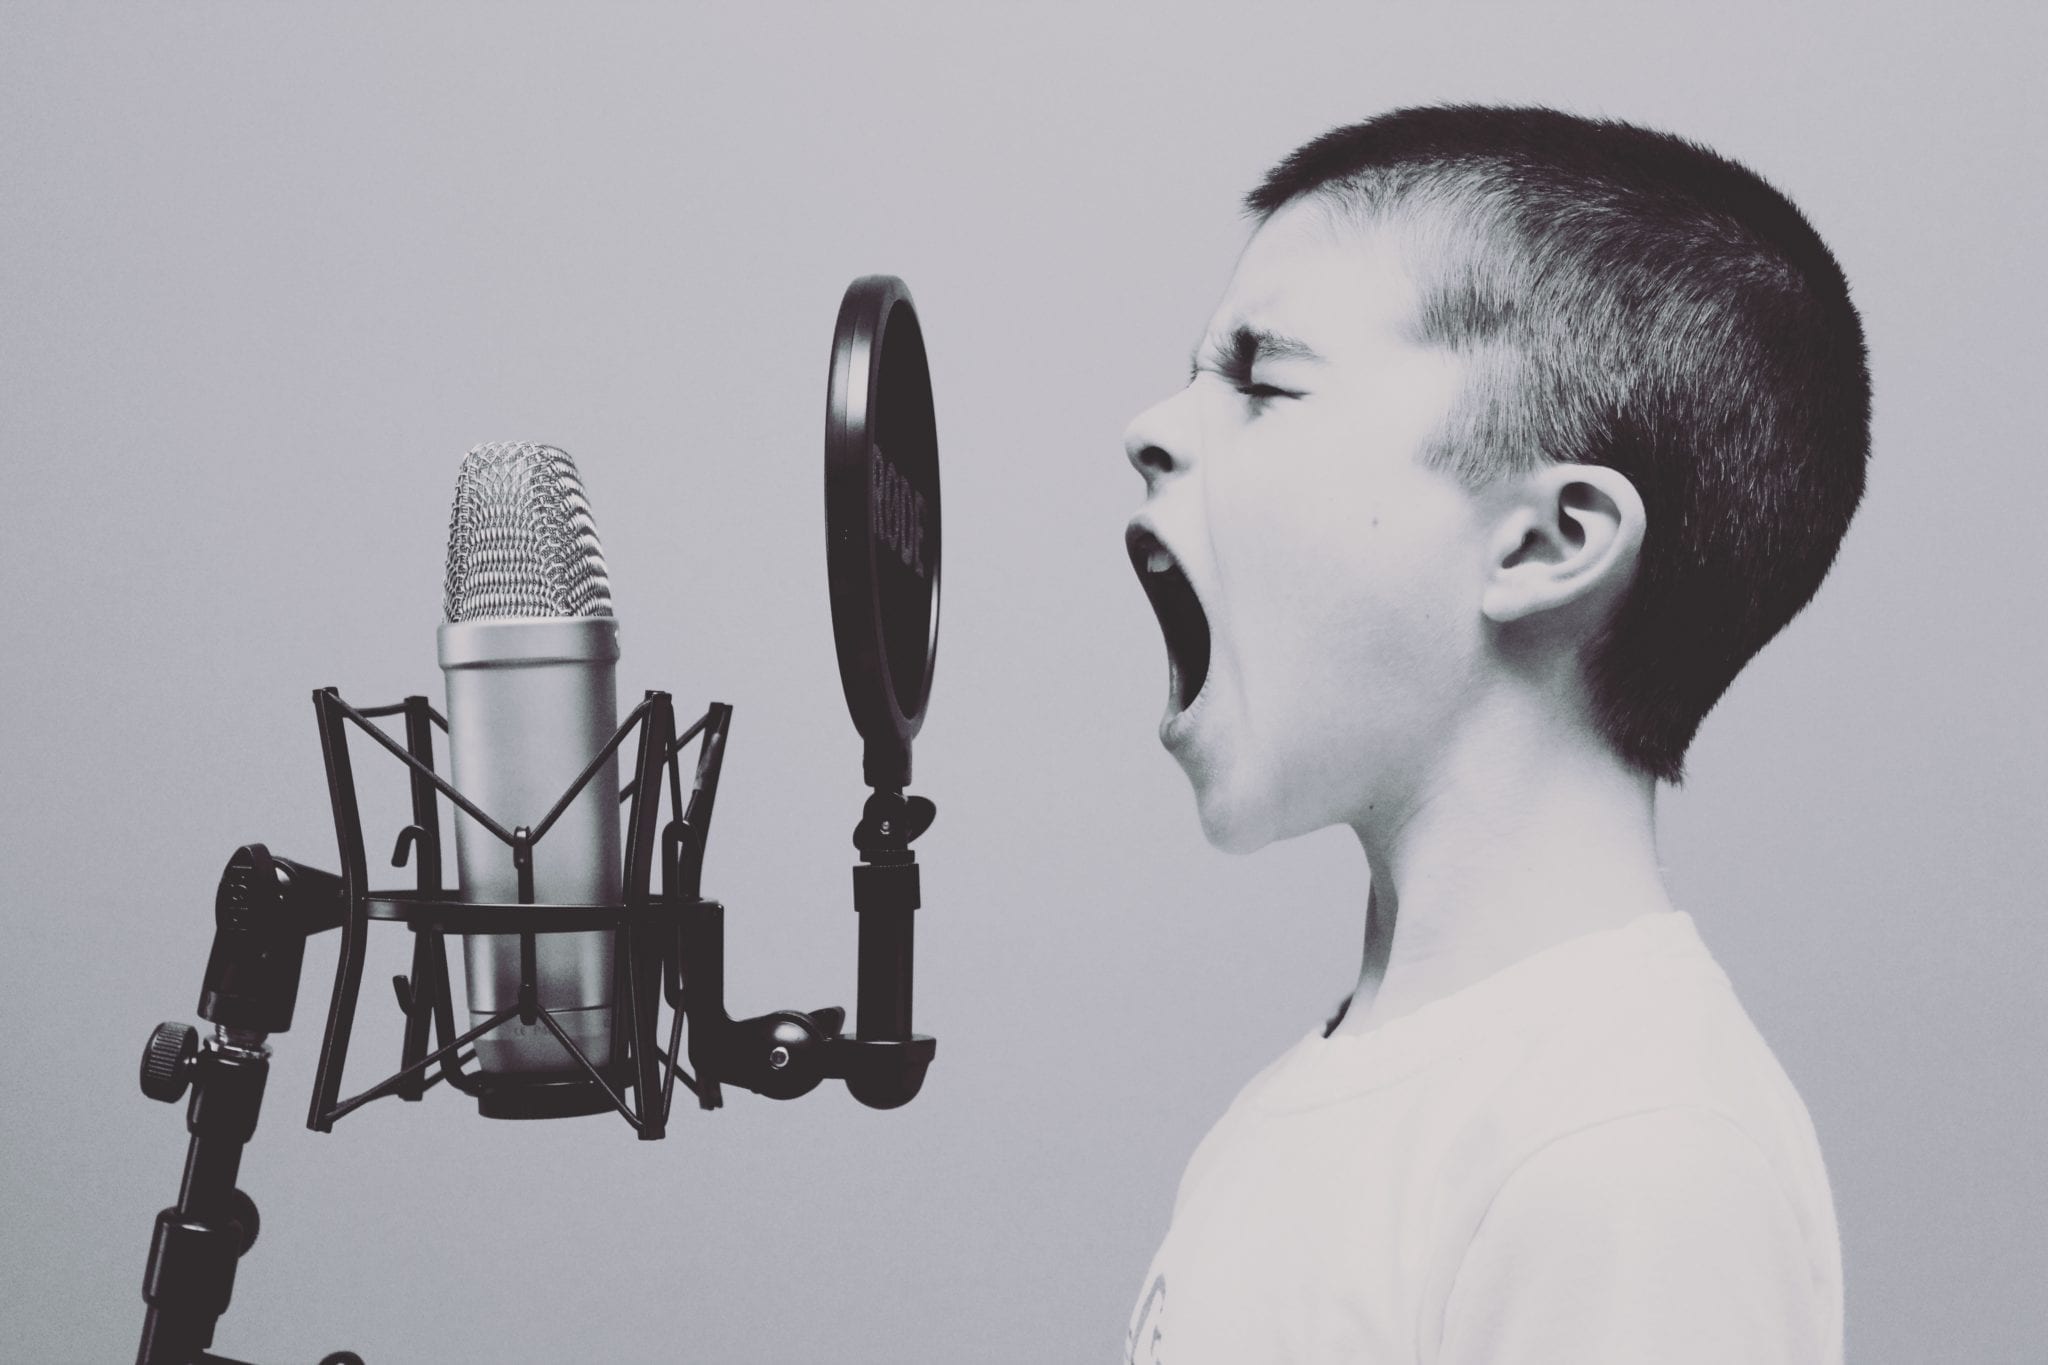 risks of not testing software properly represented by boy shouting into a microphone